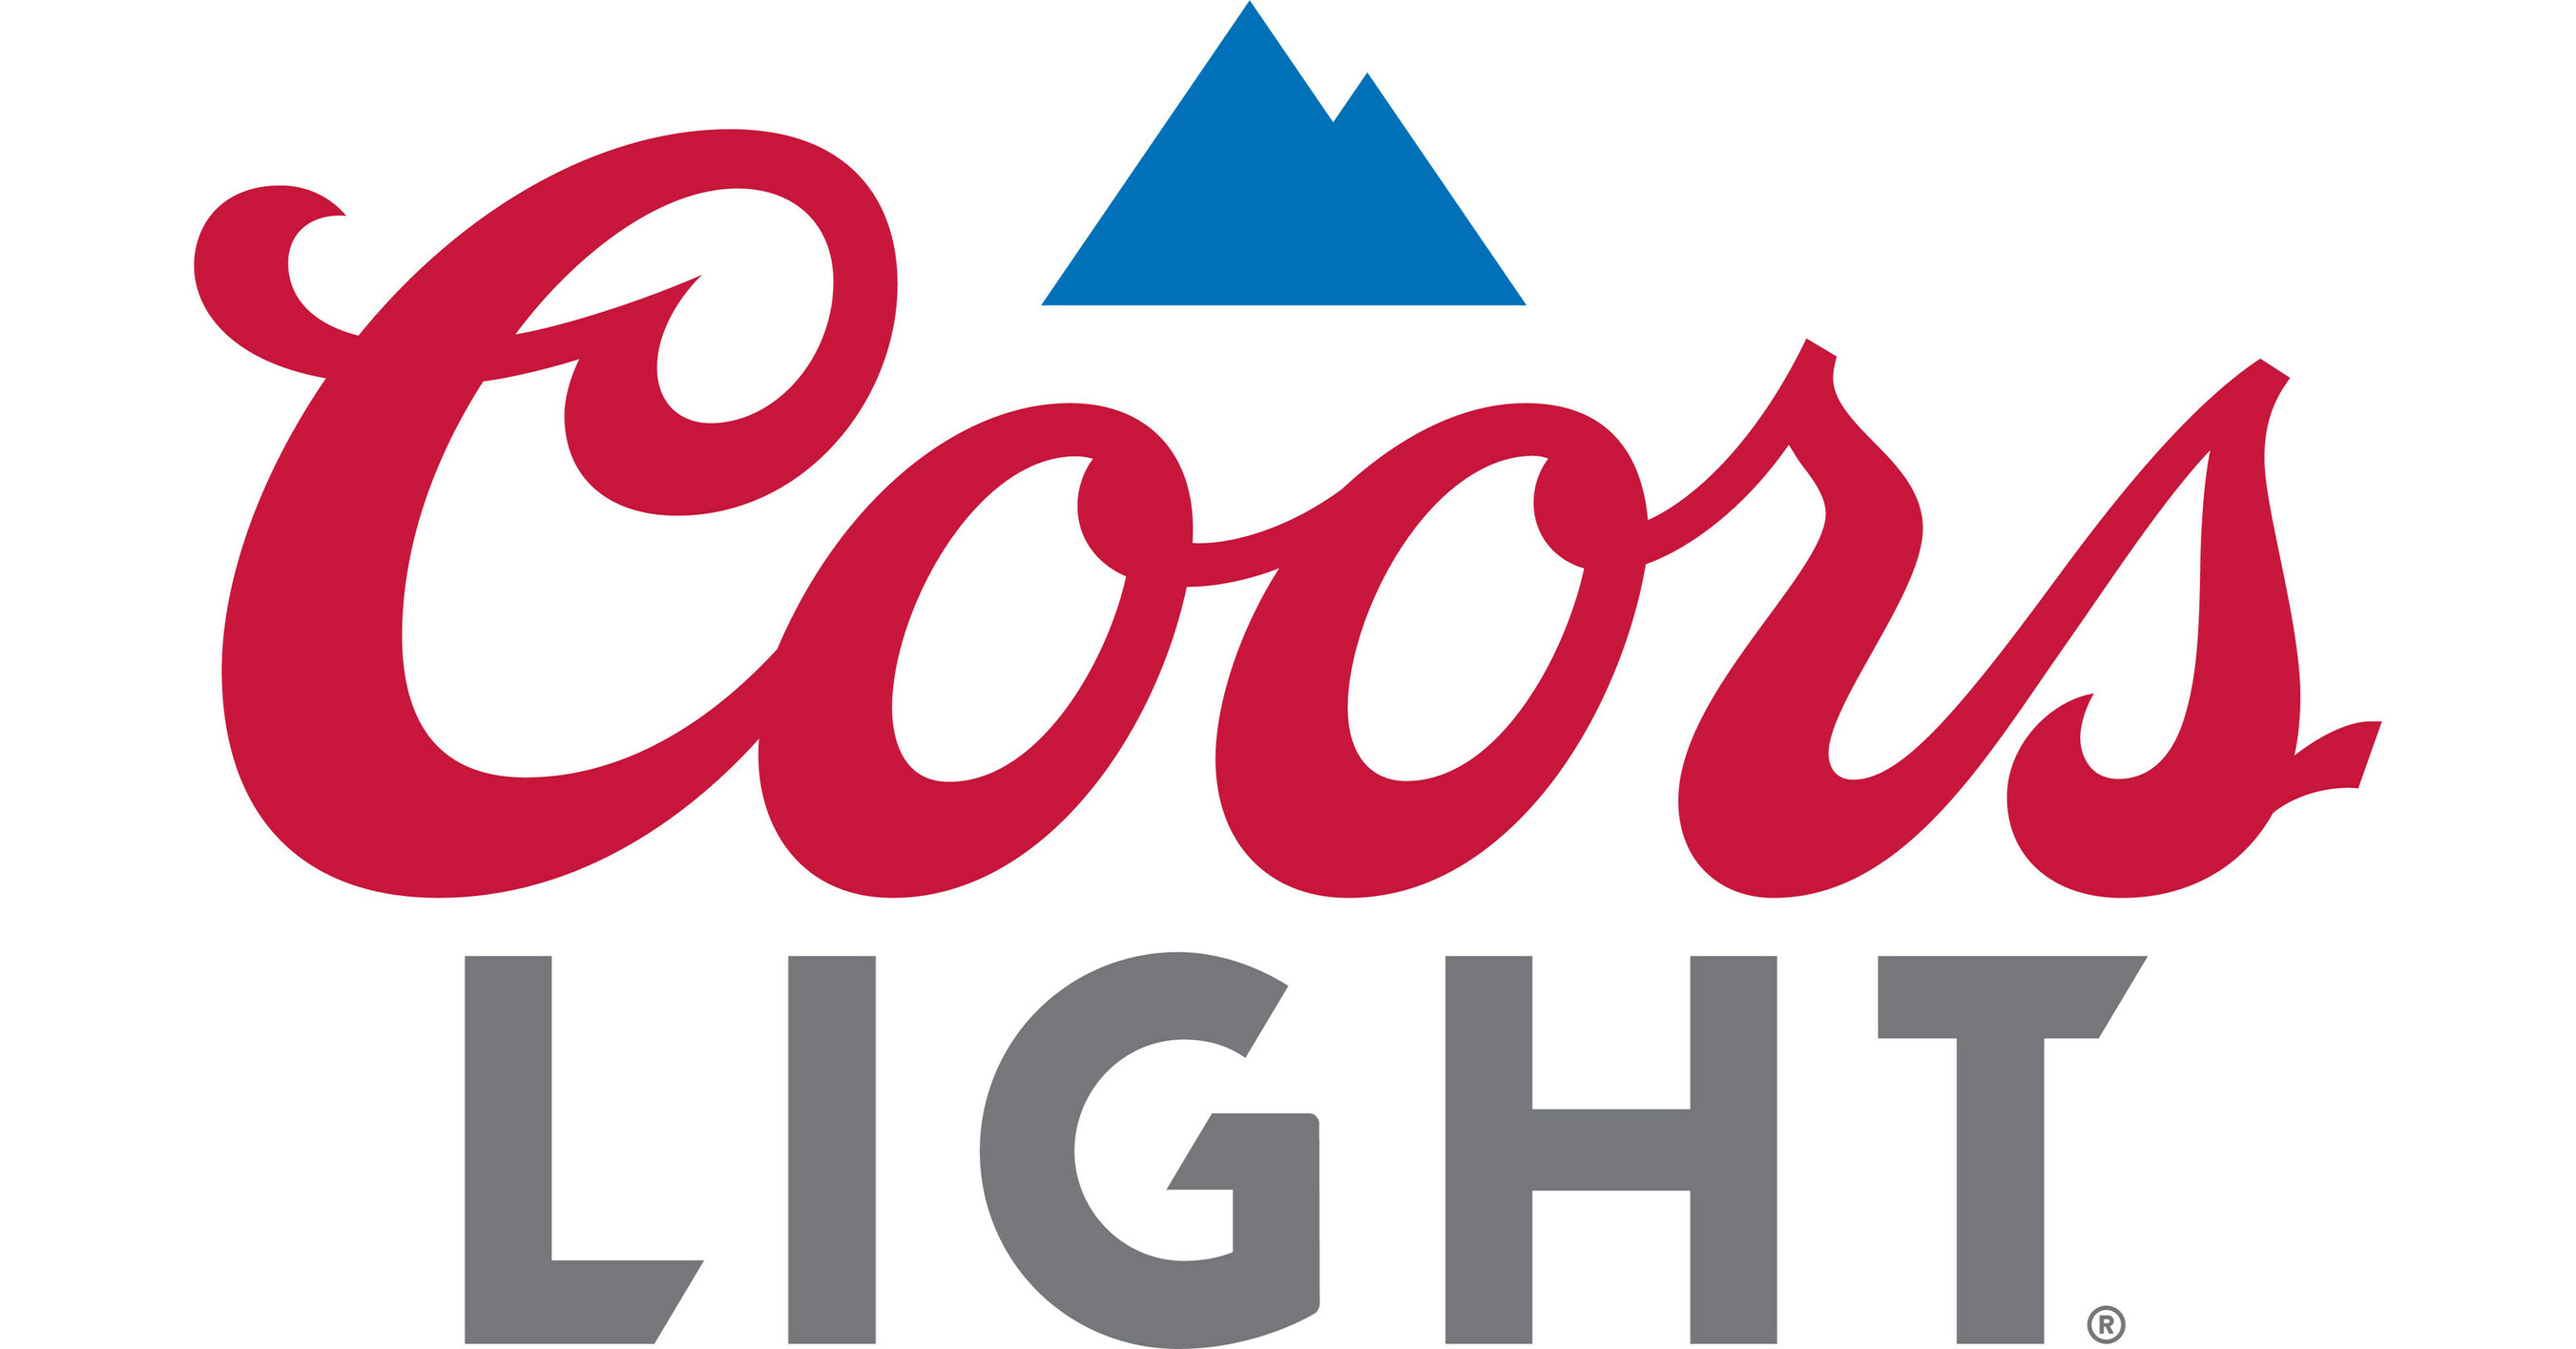 NEWS: Leagues Cup Unveils 2023 Match Schedule and Bracket Announcement  Presented by Coors Light